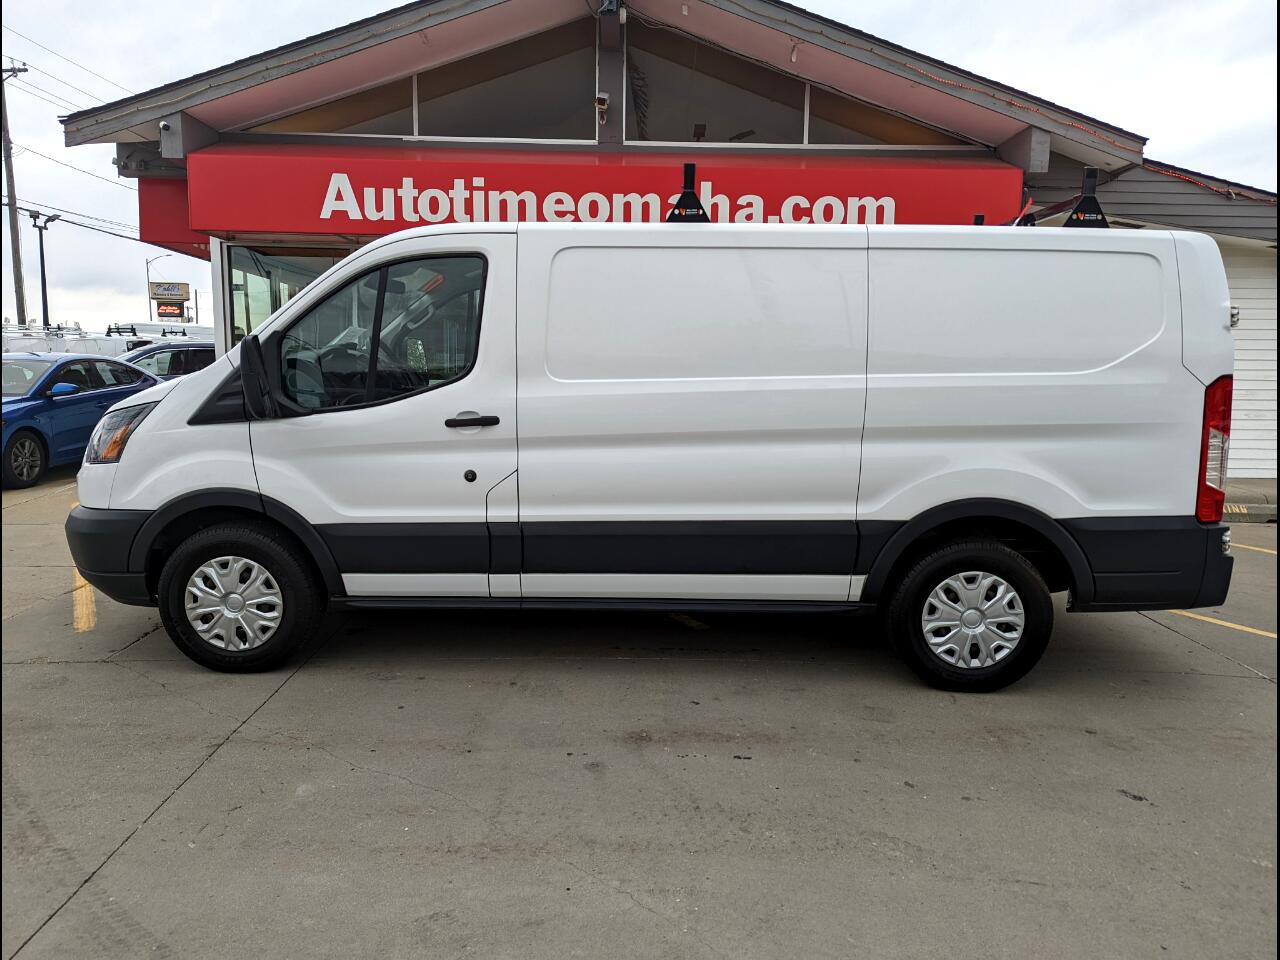 2017 Ford Transit 150 Van Low Roof w/Sliding Pass. 130-in. WB